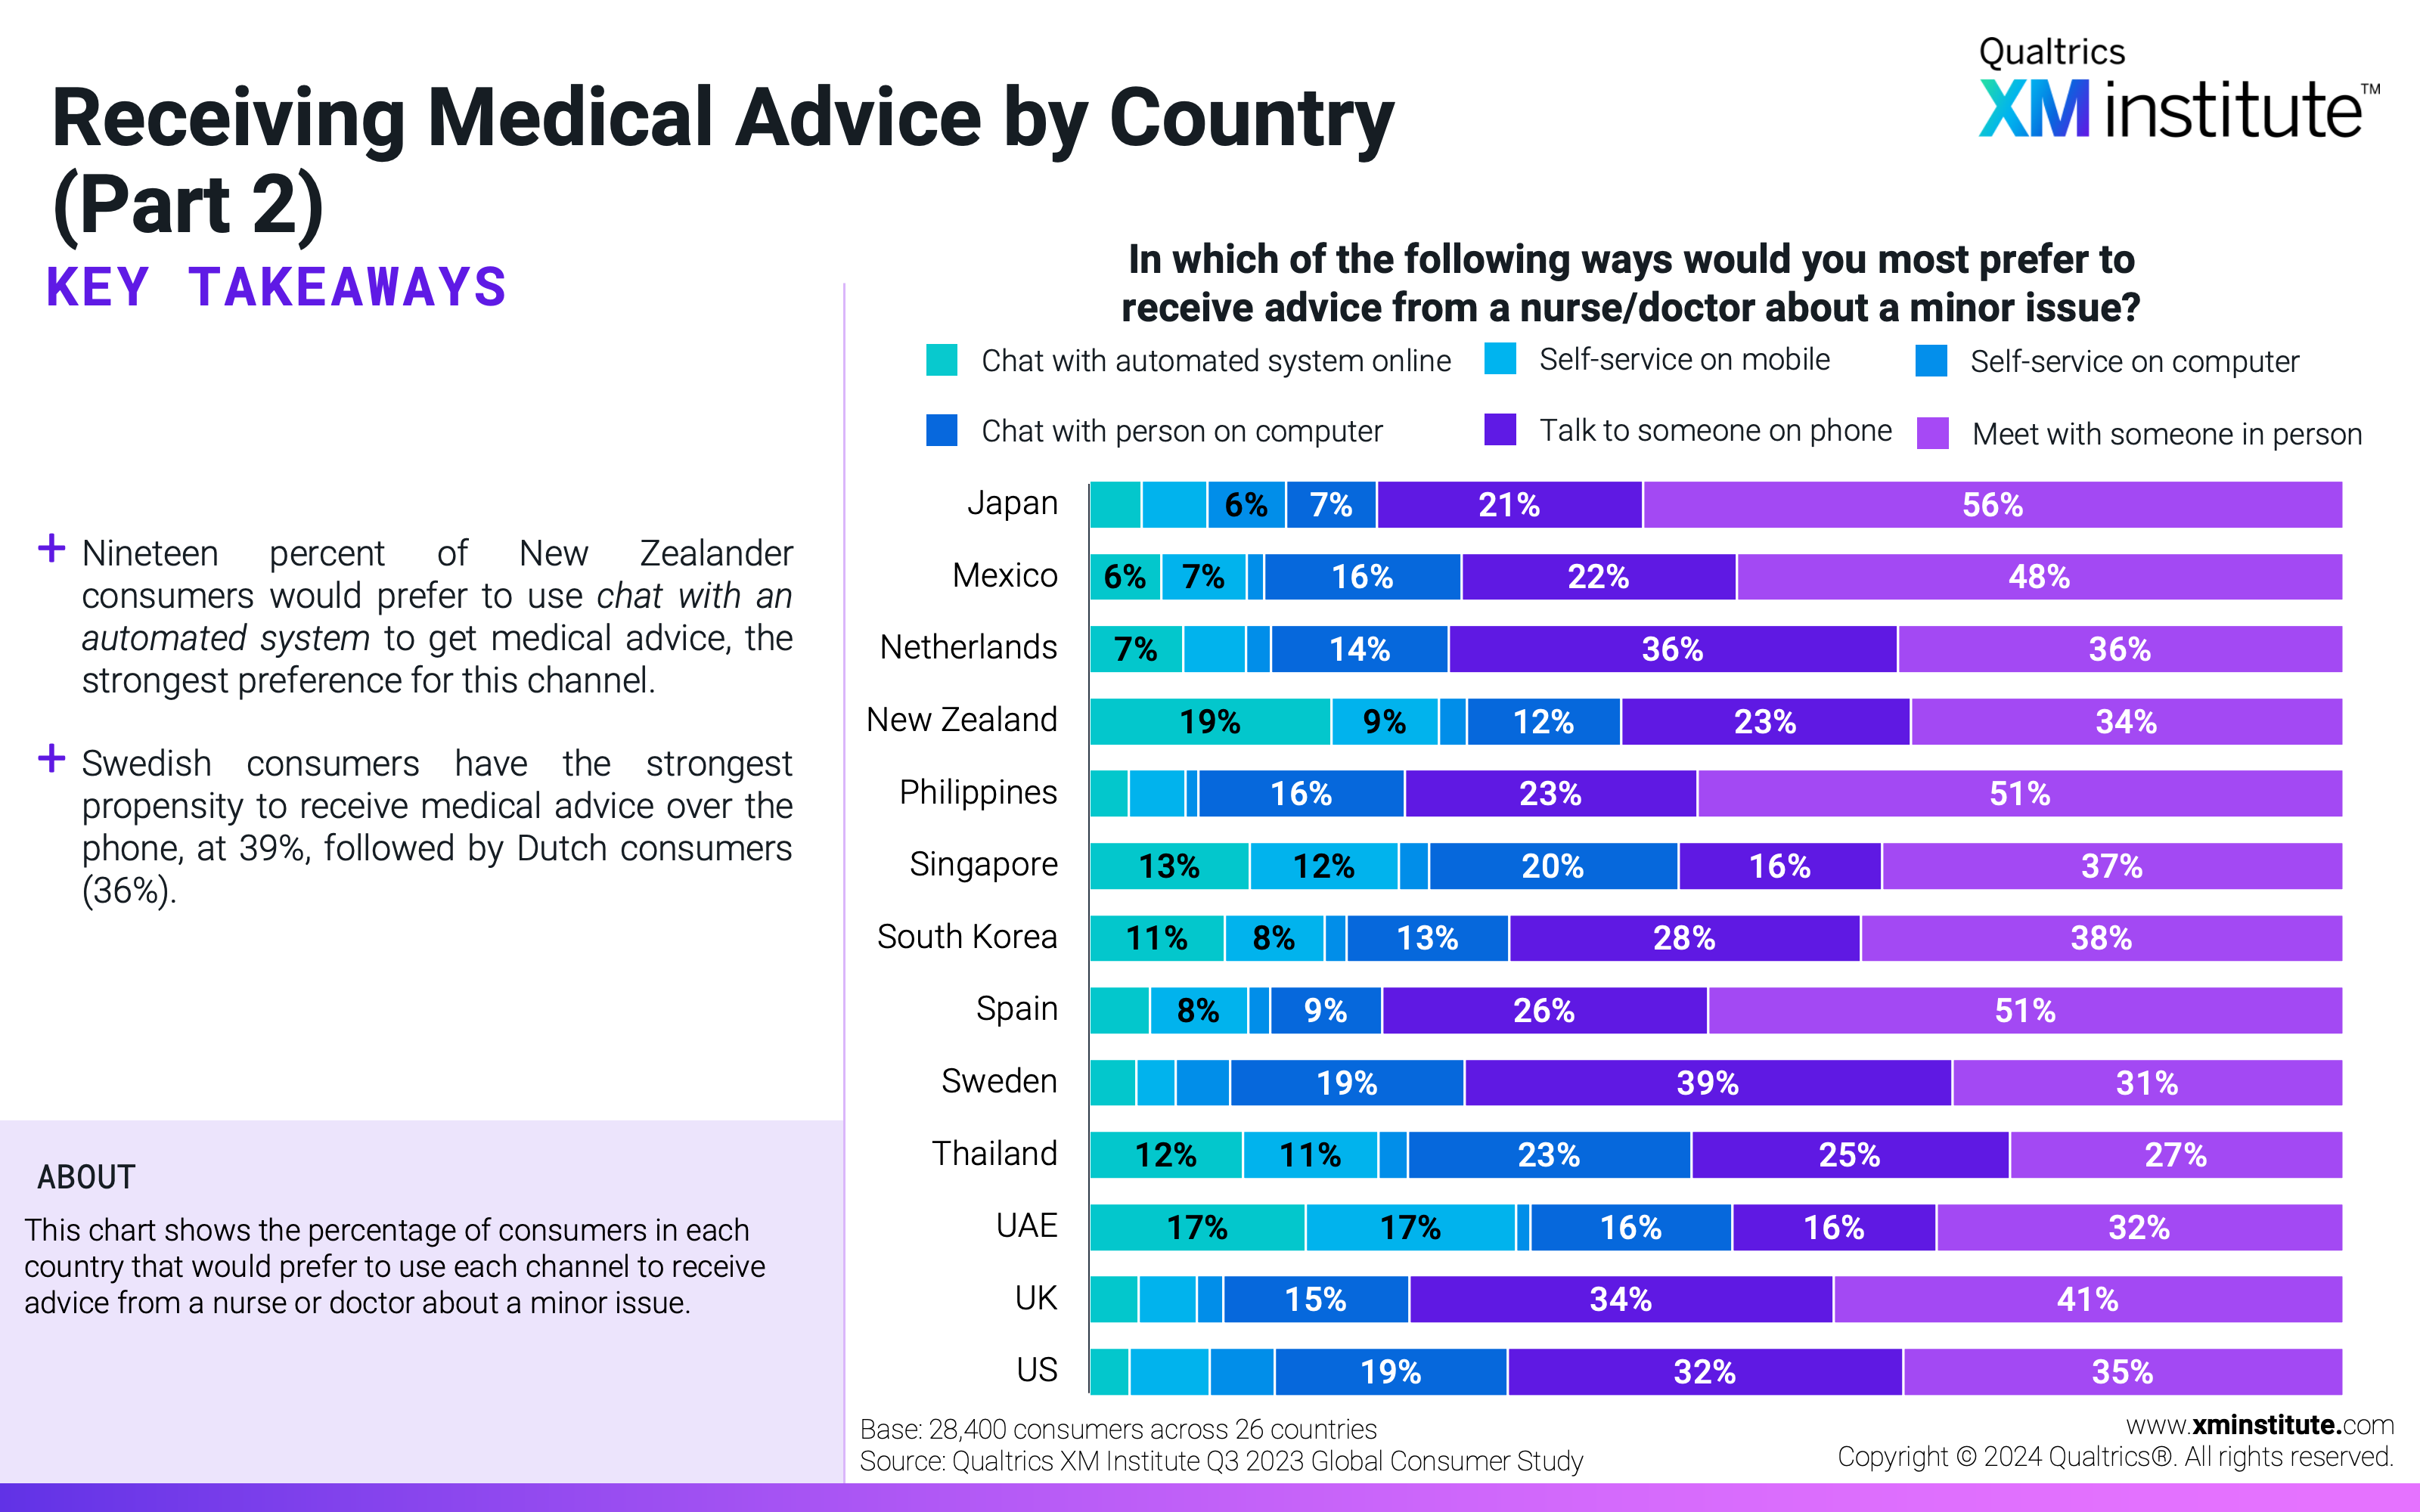 This chart shows the percentage of consumers in each country that would prefer to use each channel to receive advice from a nurse or doctor about a minor issue. 